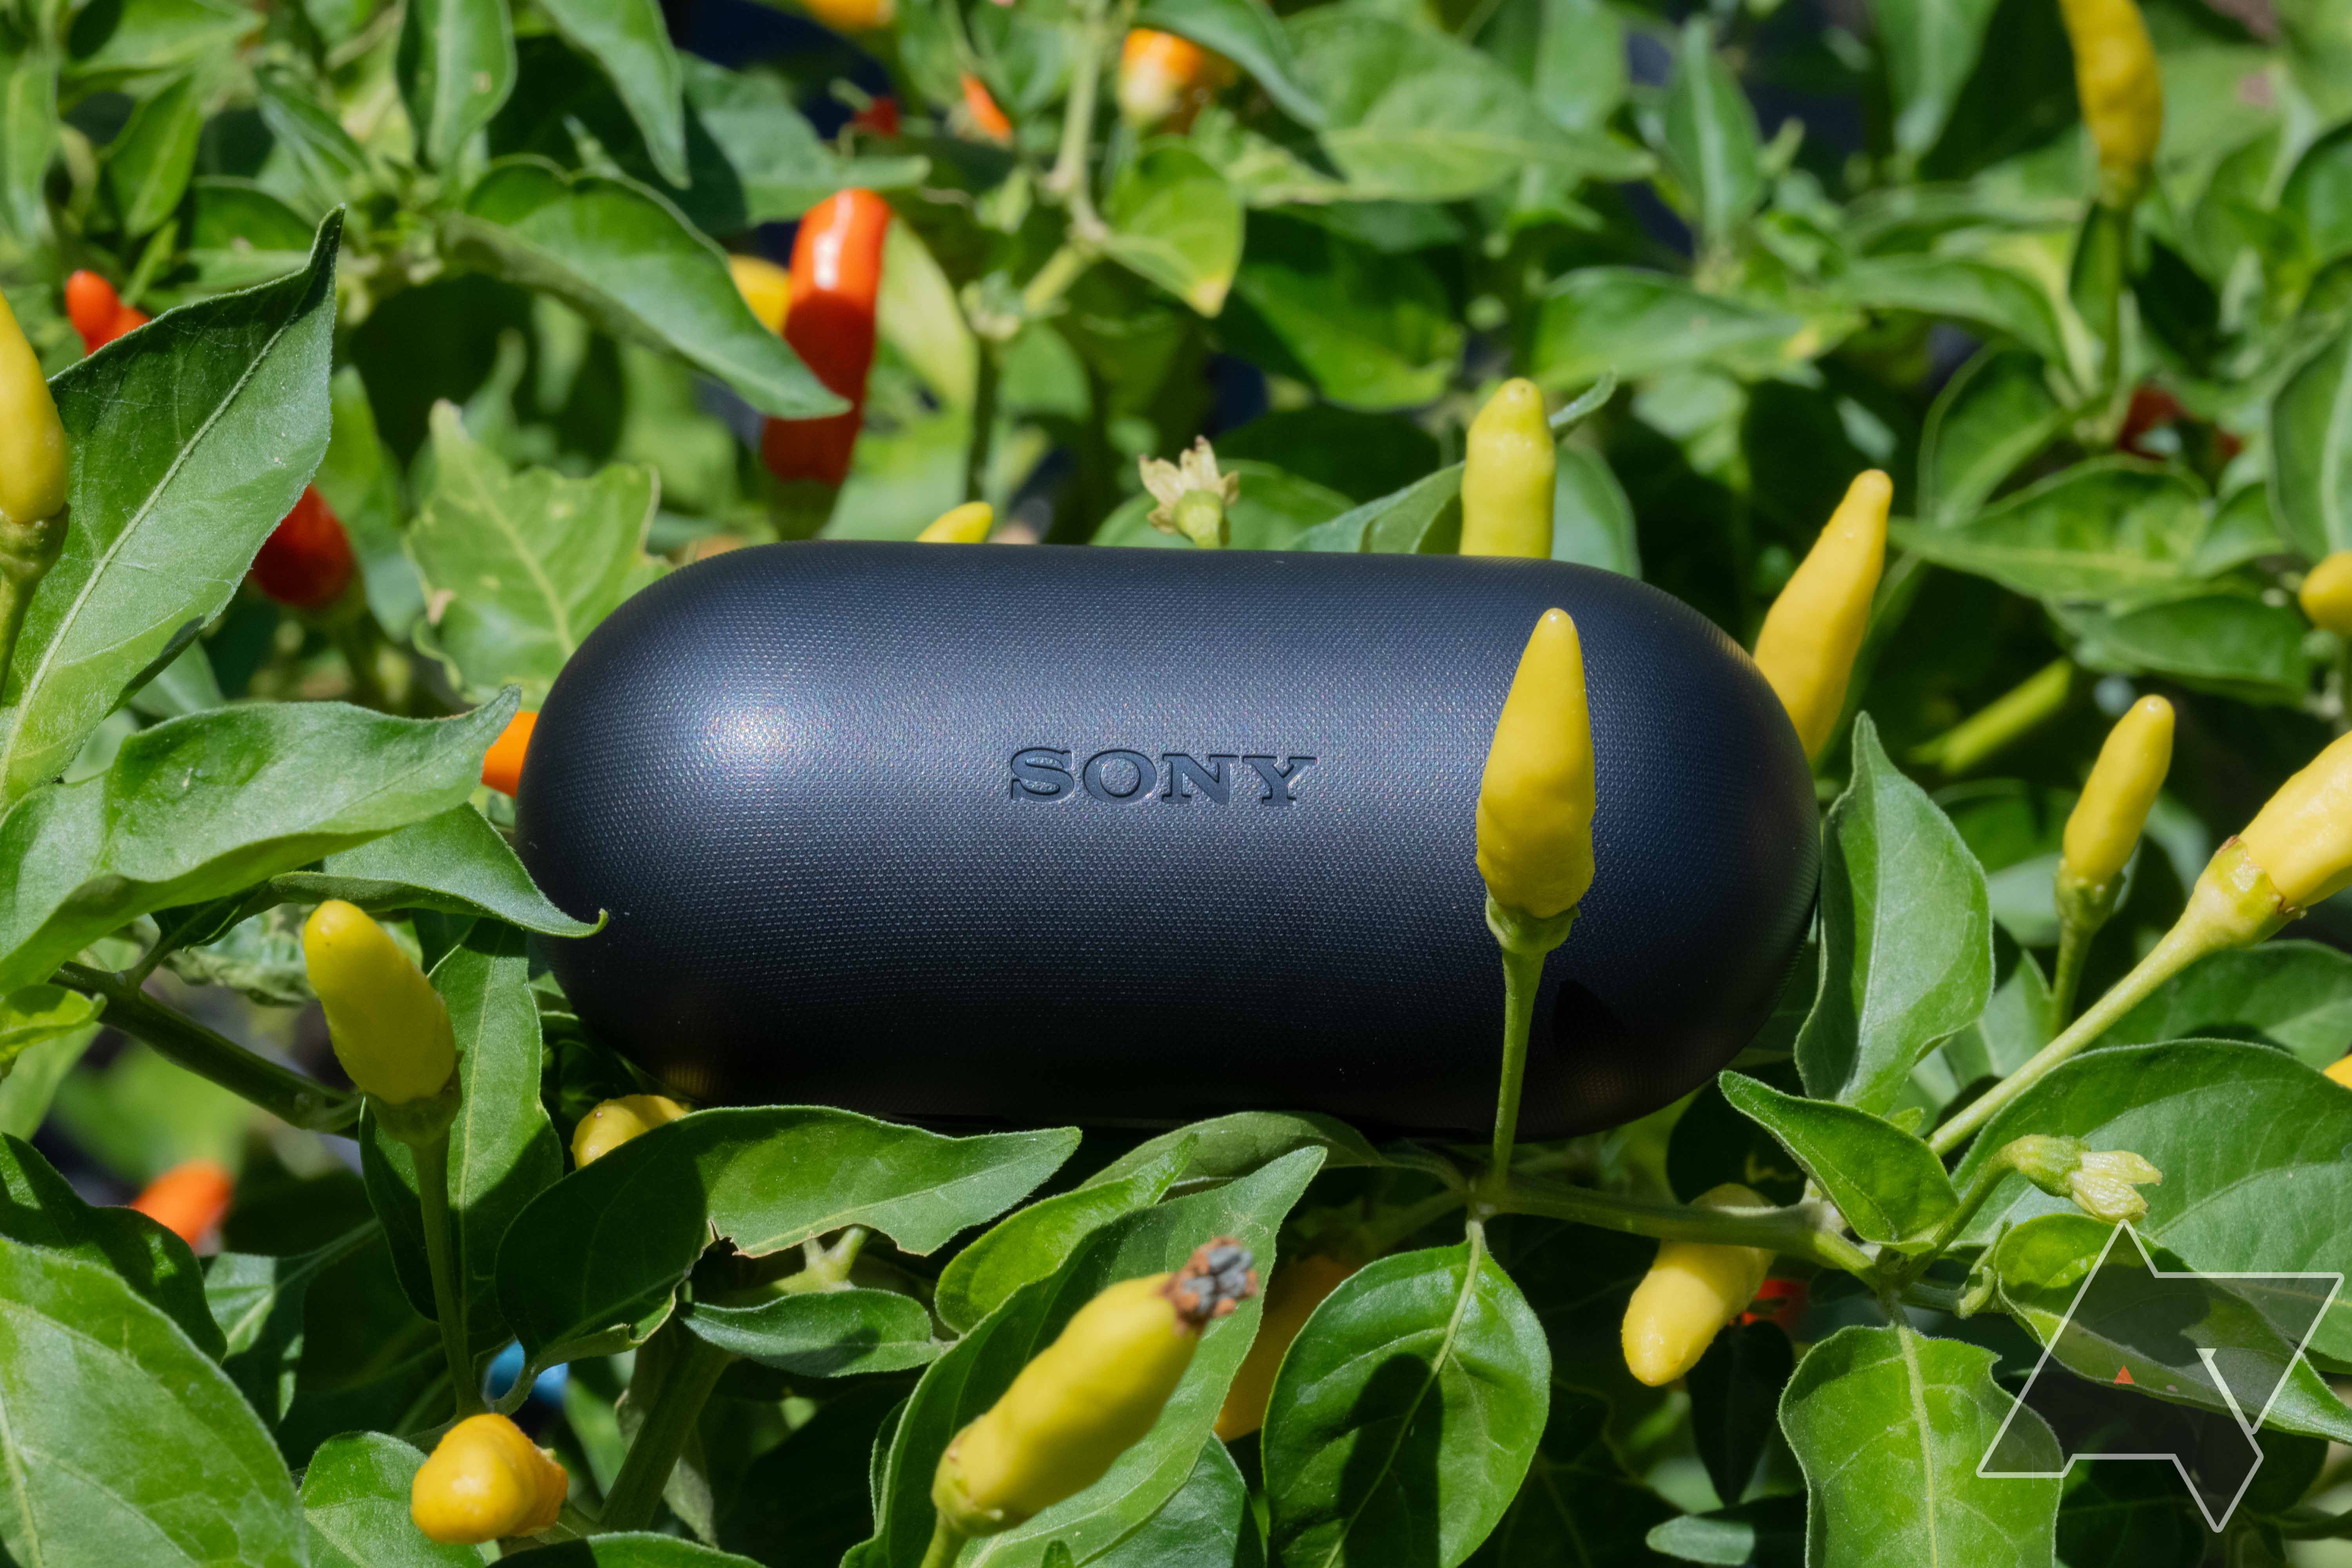 The Sony WF-C700N charging case resting in a pepper plant, surrounded by peppers